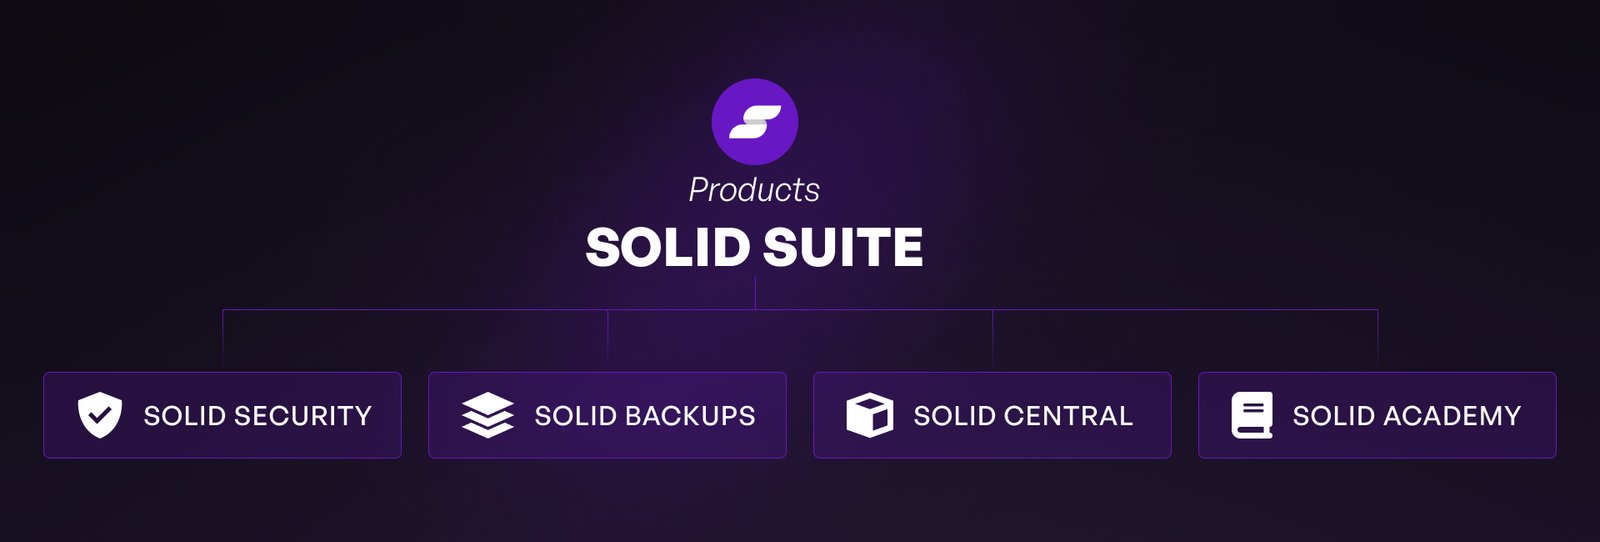 SolidWP product suite diagram featuring Solid Security, Solid Backups, Solid Central, and Solid Academy, illustrating the extensive range of WordPress tools and services provided.